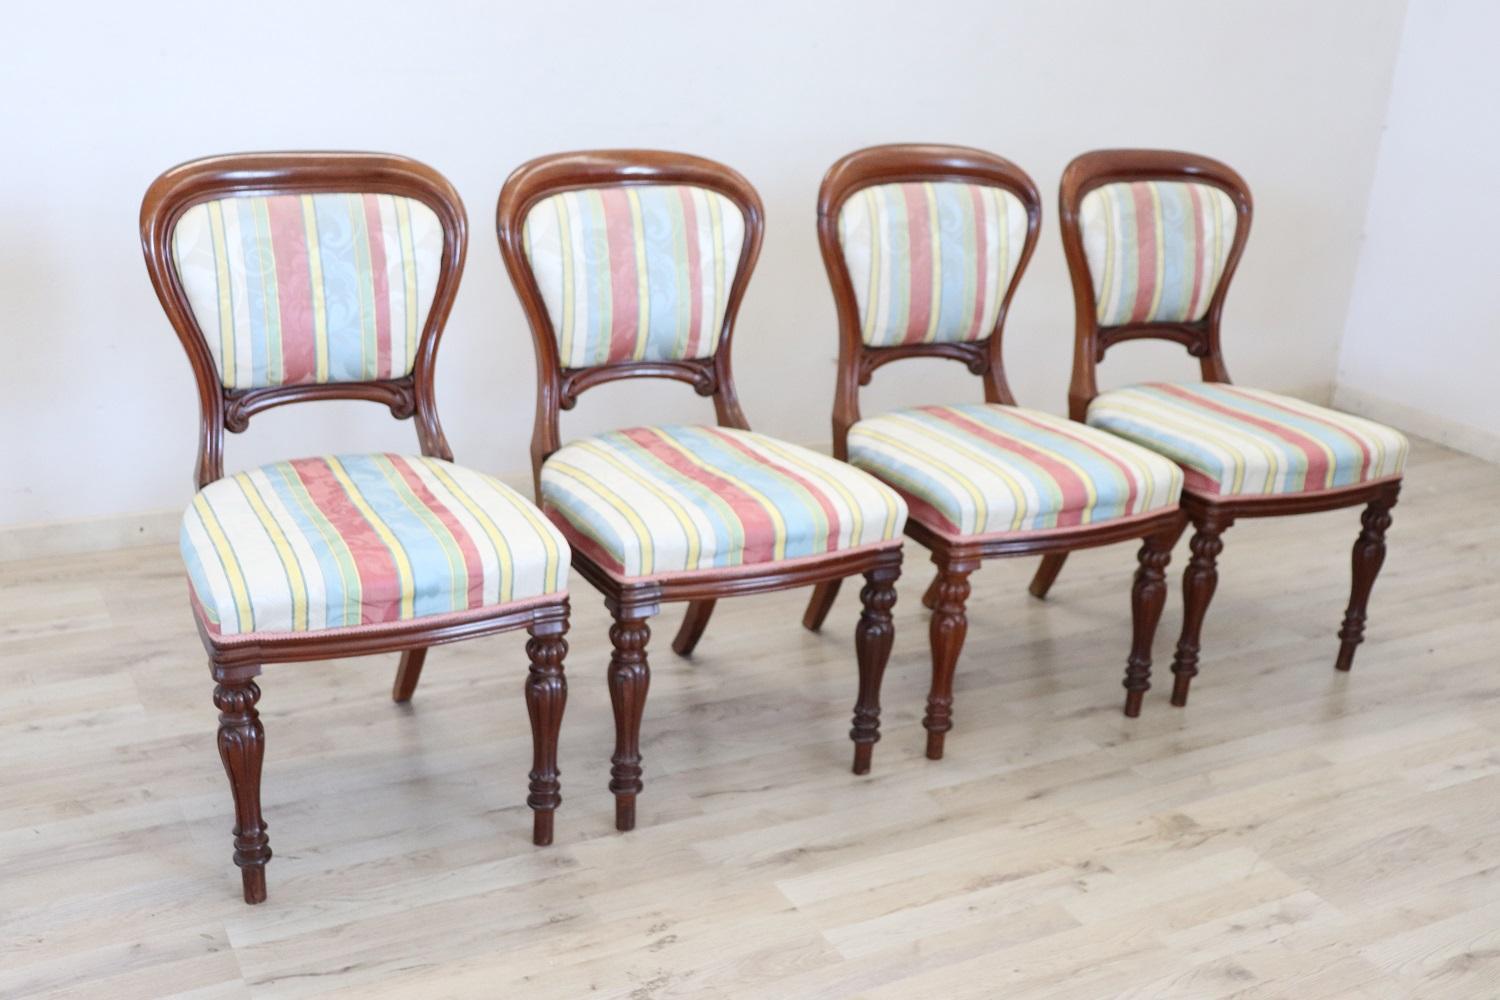 Series of four refined 19th century authentic English Victorian mahogany wood four chairs. The legs are very elegant with carved wood decorations. The seat is wide and comfortable in goods conditions. Antique goods conditions.

 